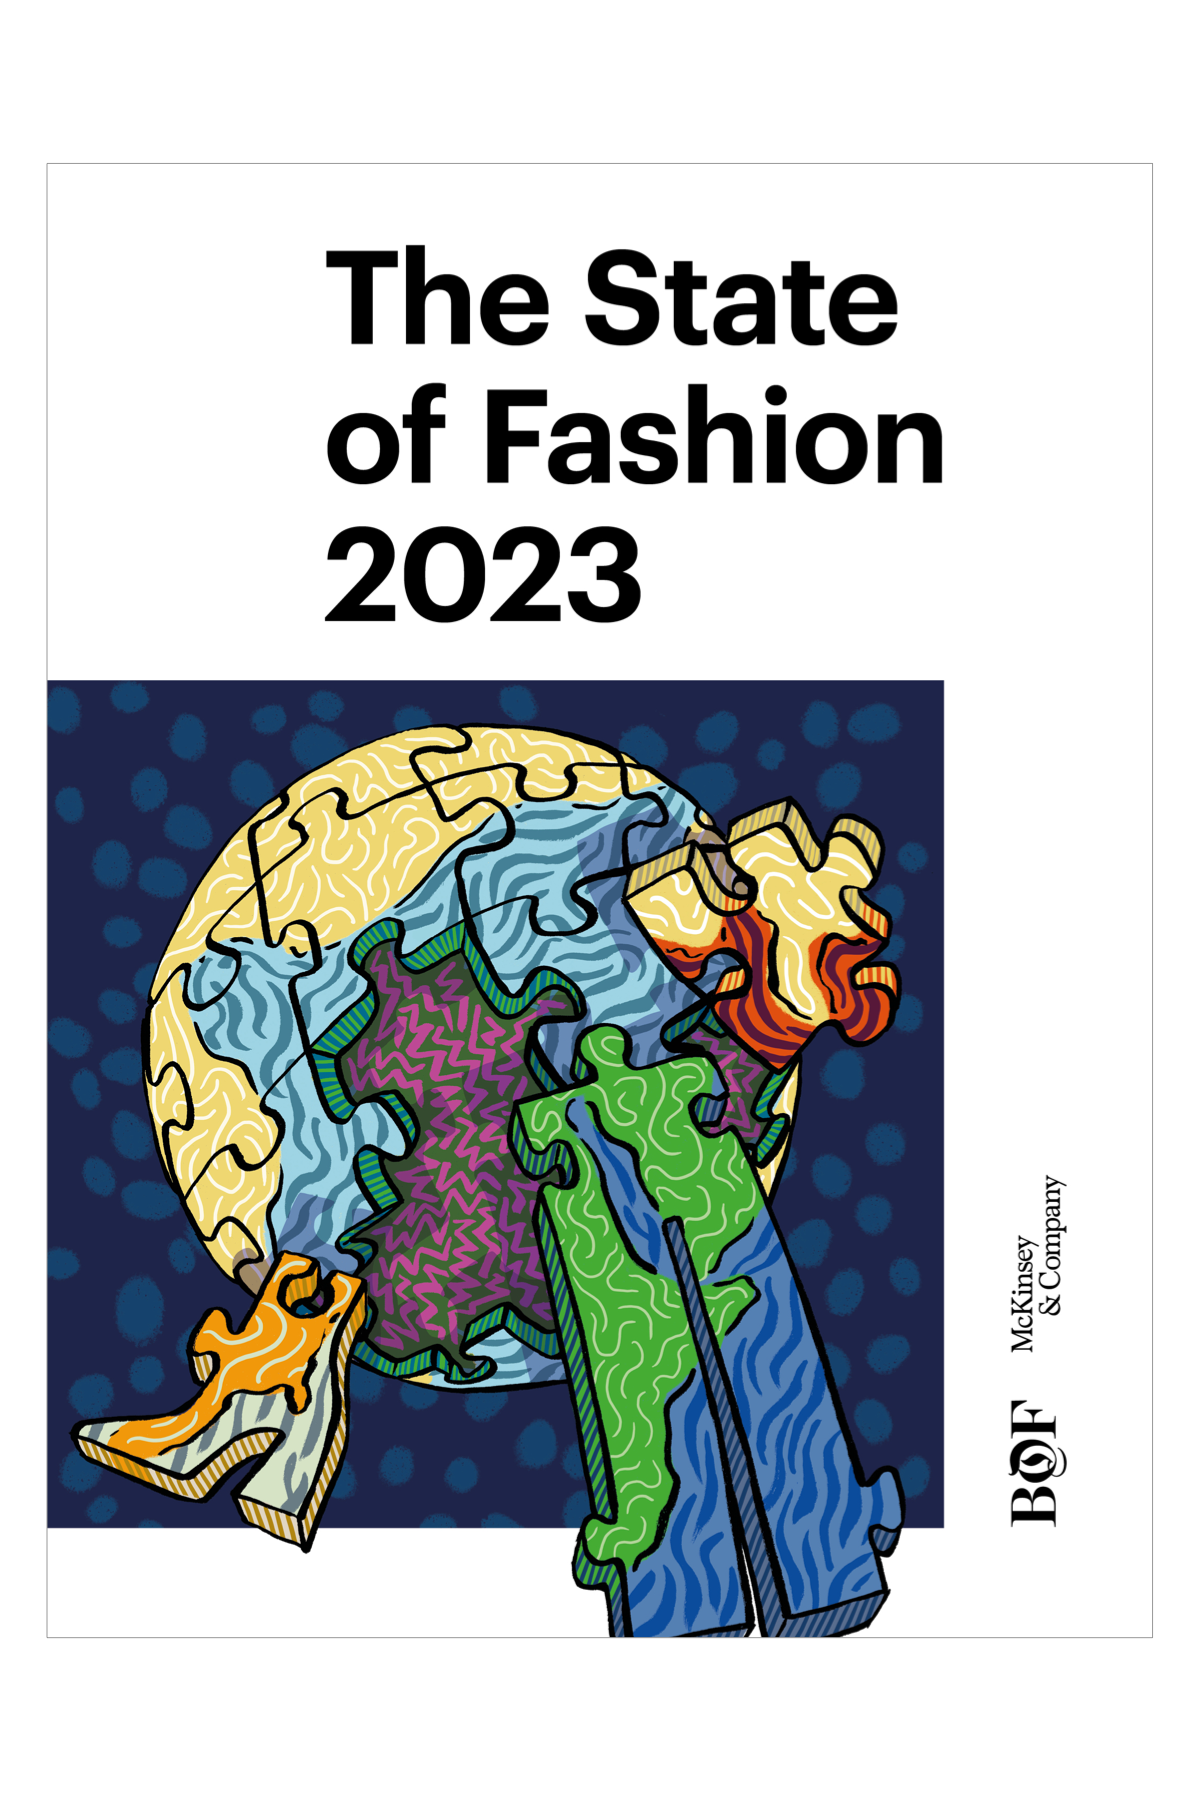 New Sustainable Fashion Brands To Shops in 2023, The Enterprise World, by  The Enterprise World Magazine